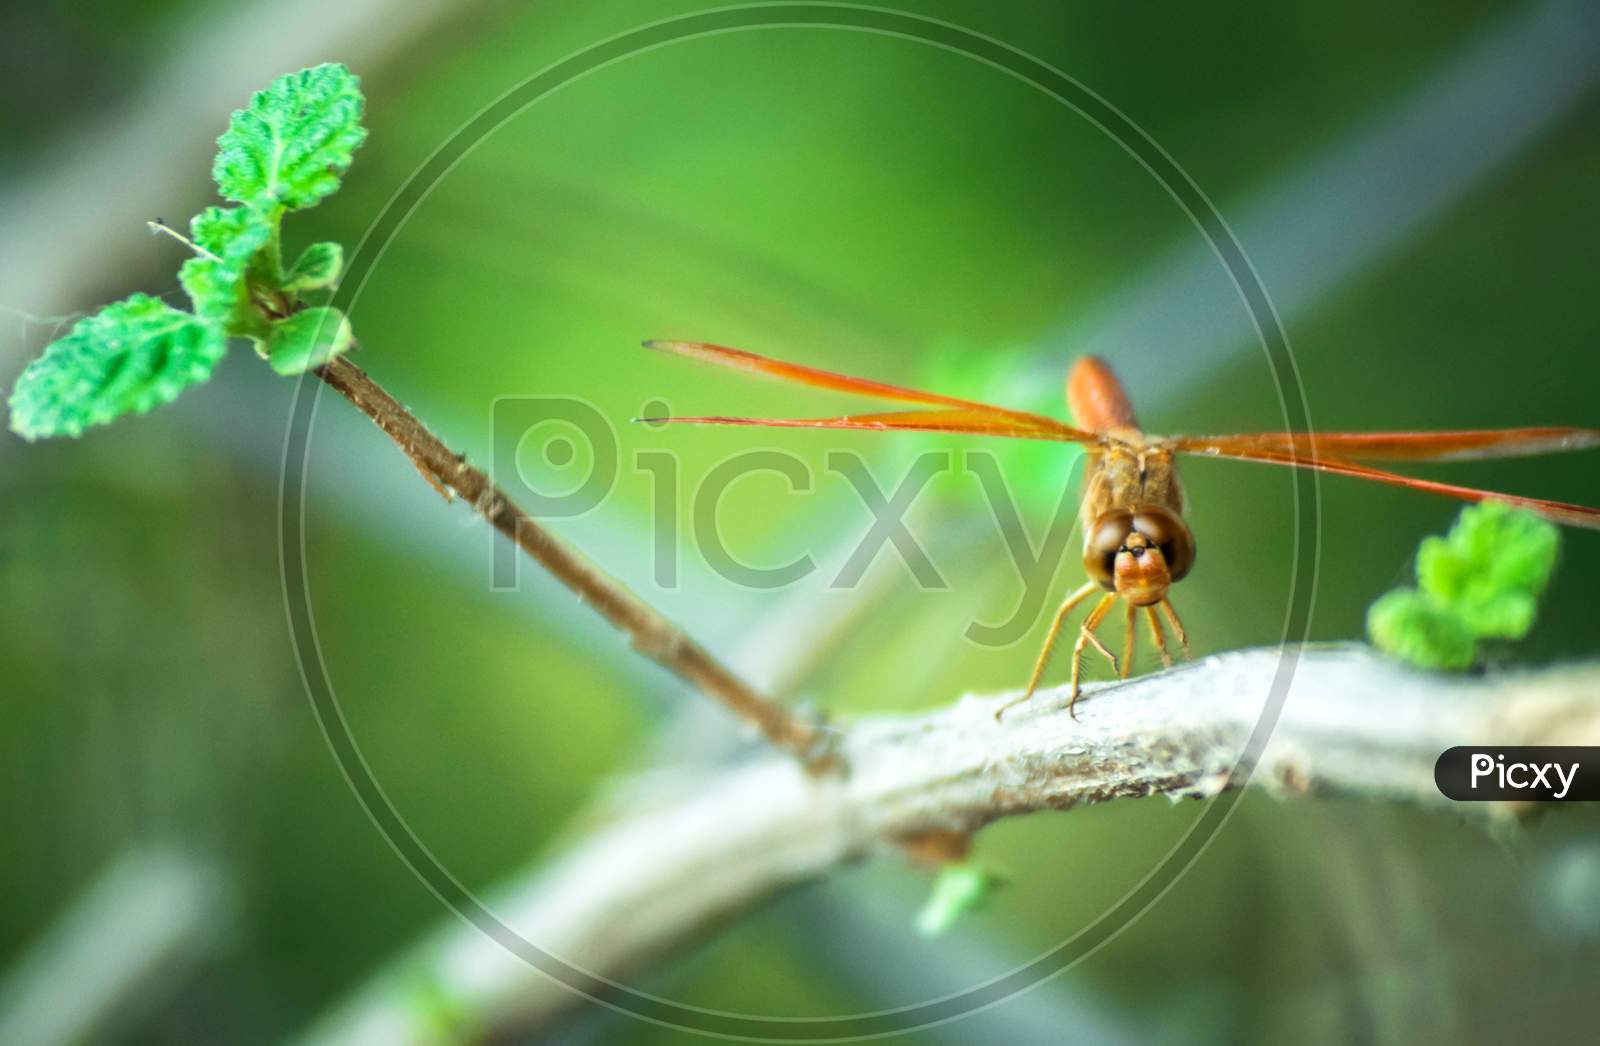 dragonfly on a wooden branch with green background